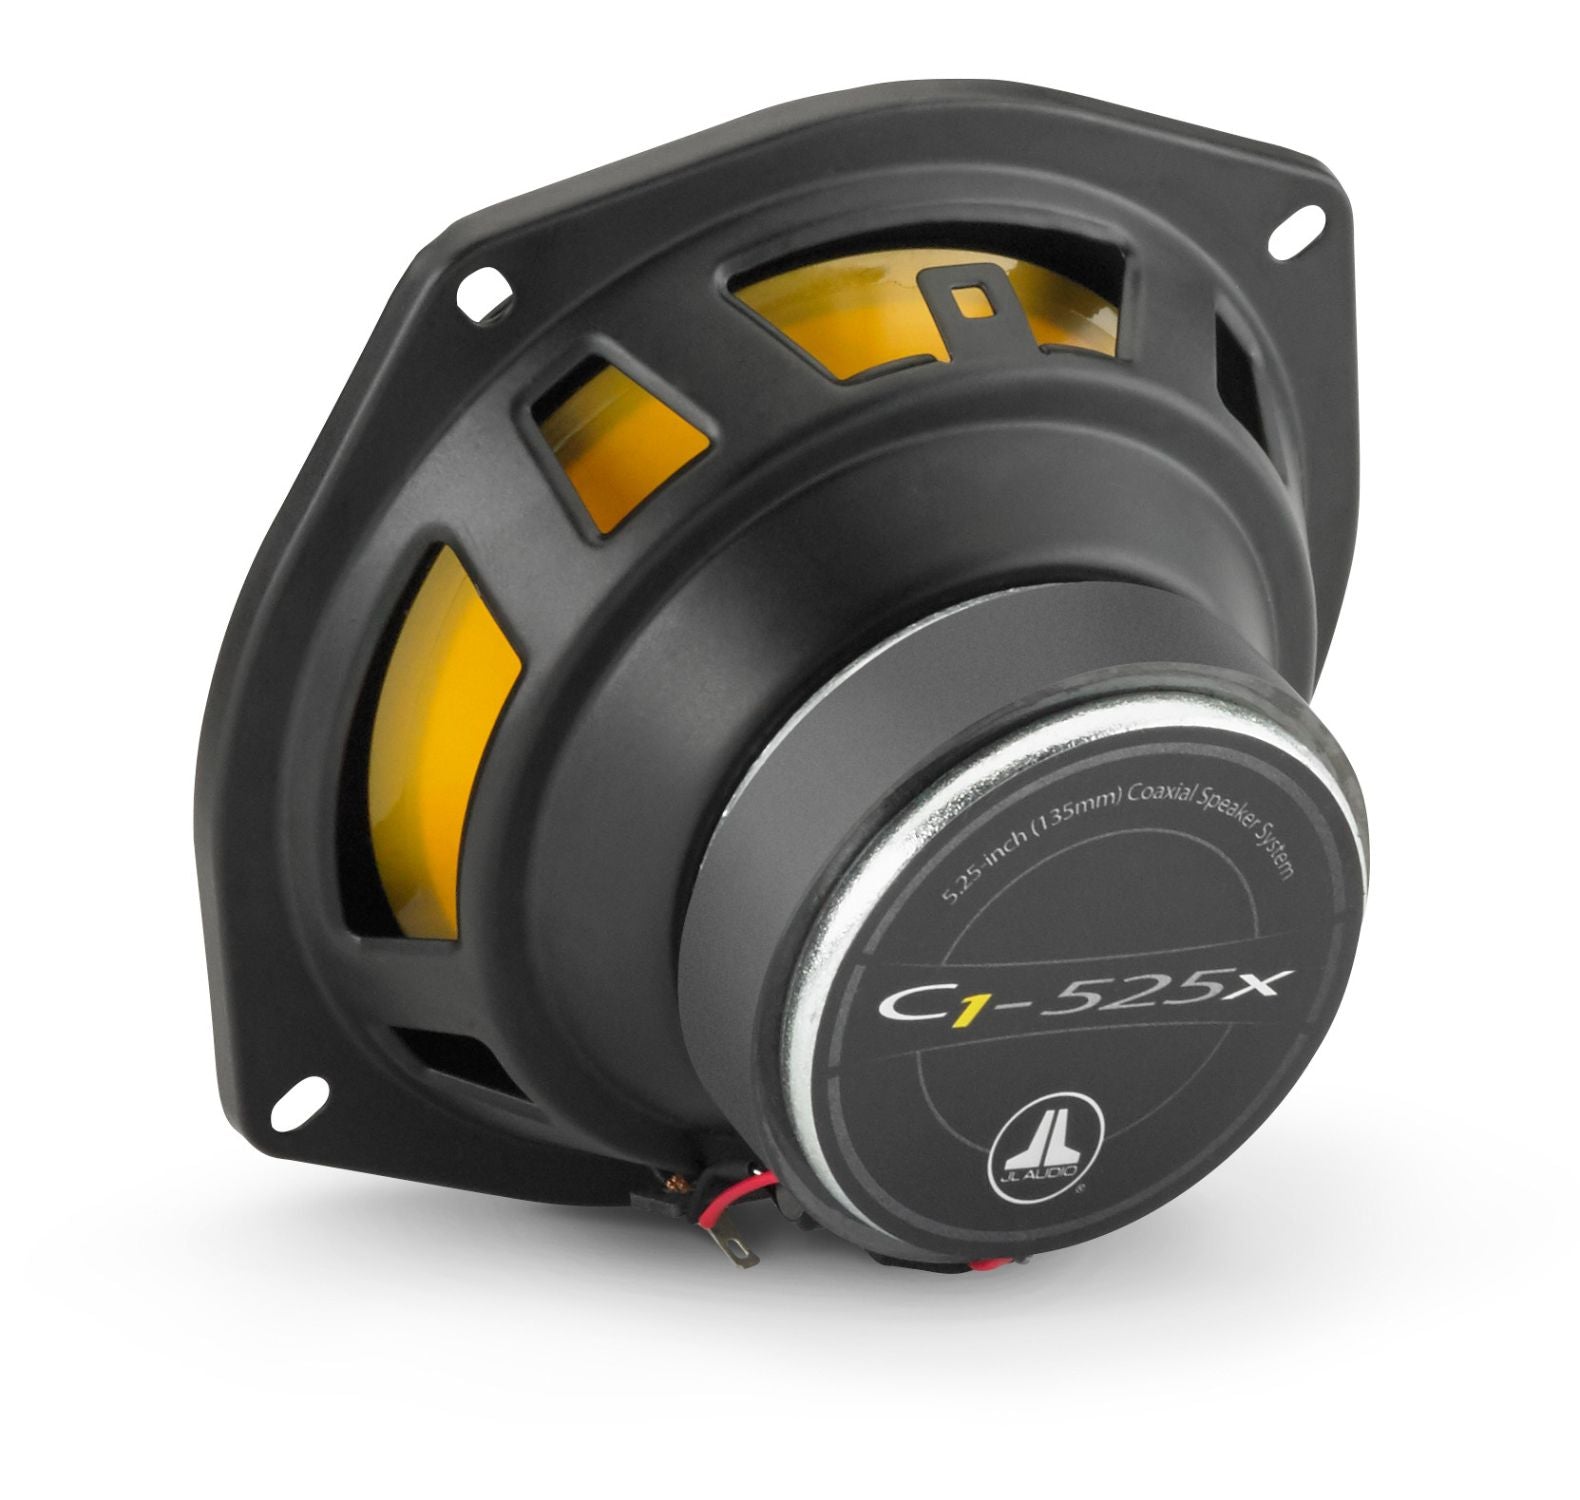 Rear of C1-525x Coaxial Speaker Facing Right